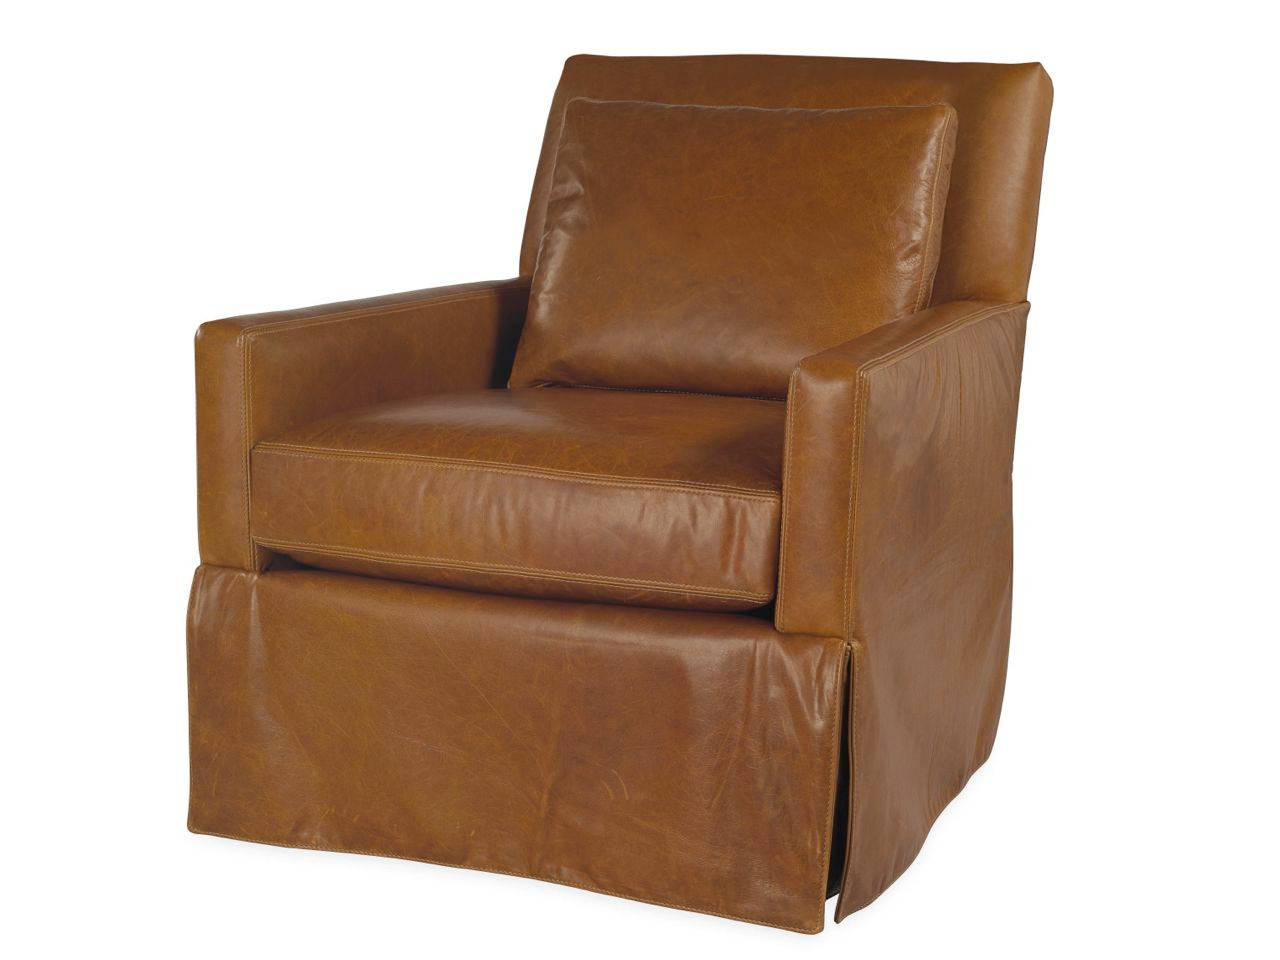 Downing Leather Chair Leather Armchairs Living Room Chairs